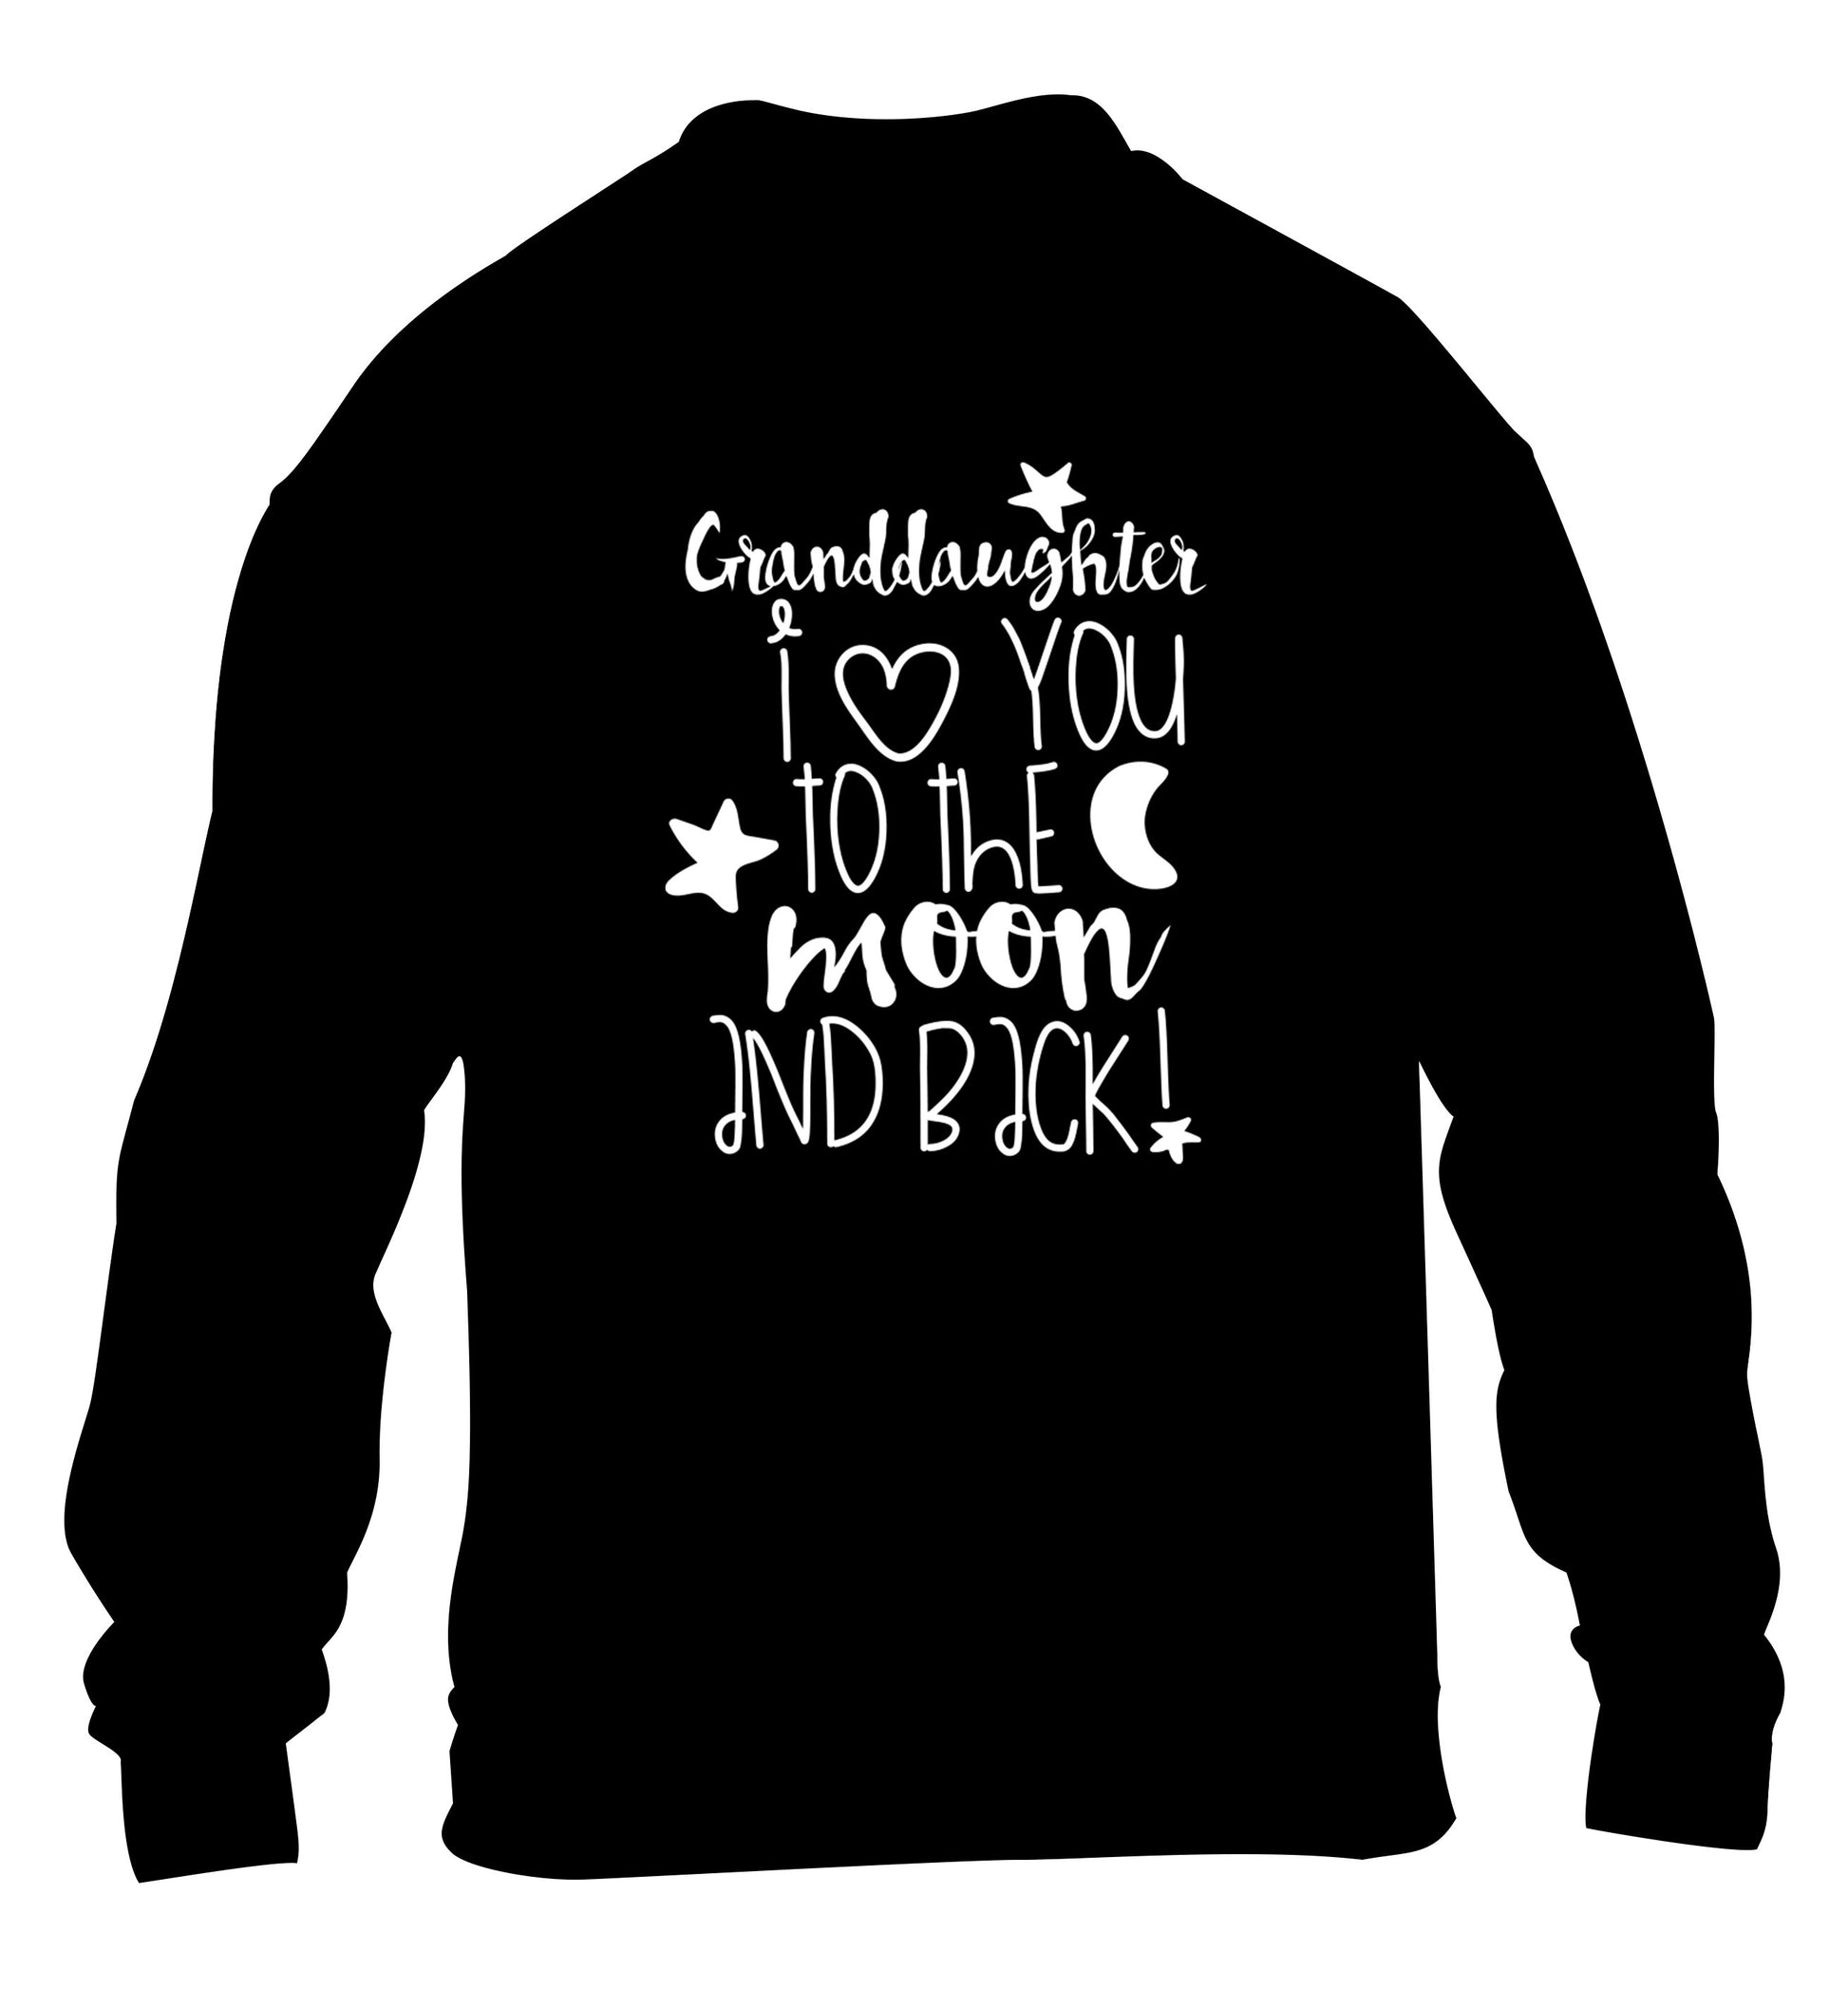 Granddaughter I love you to the moon and back children's black  sweater 12-14 Years